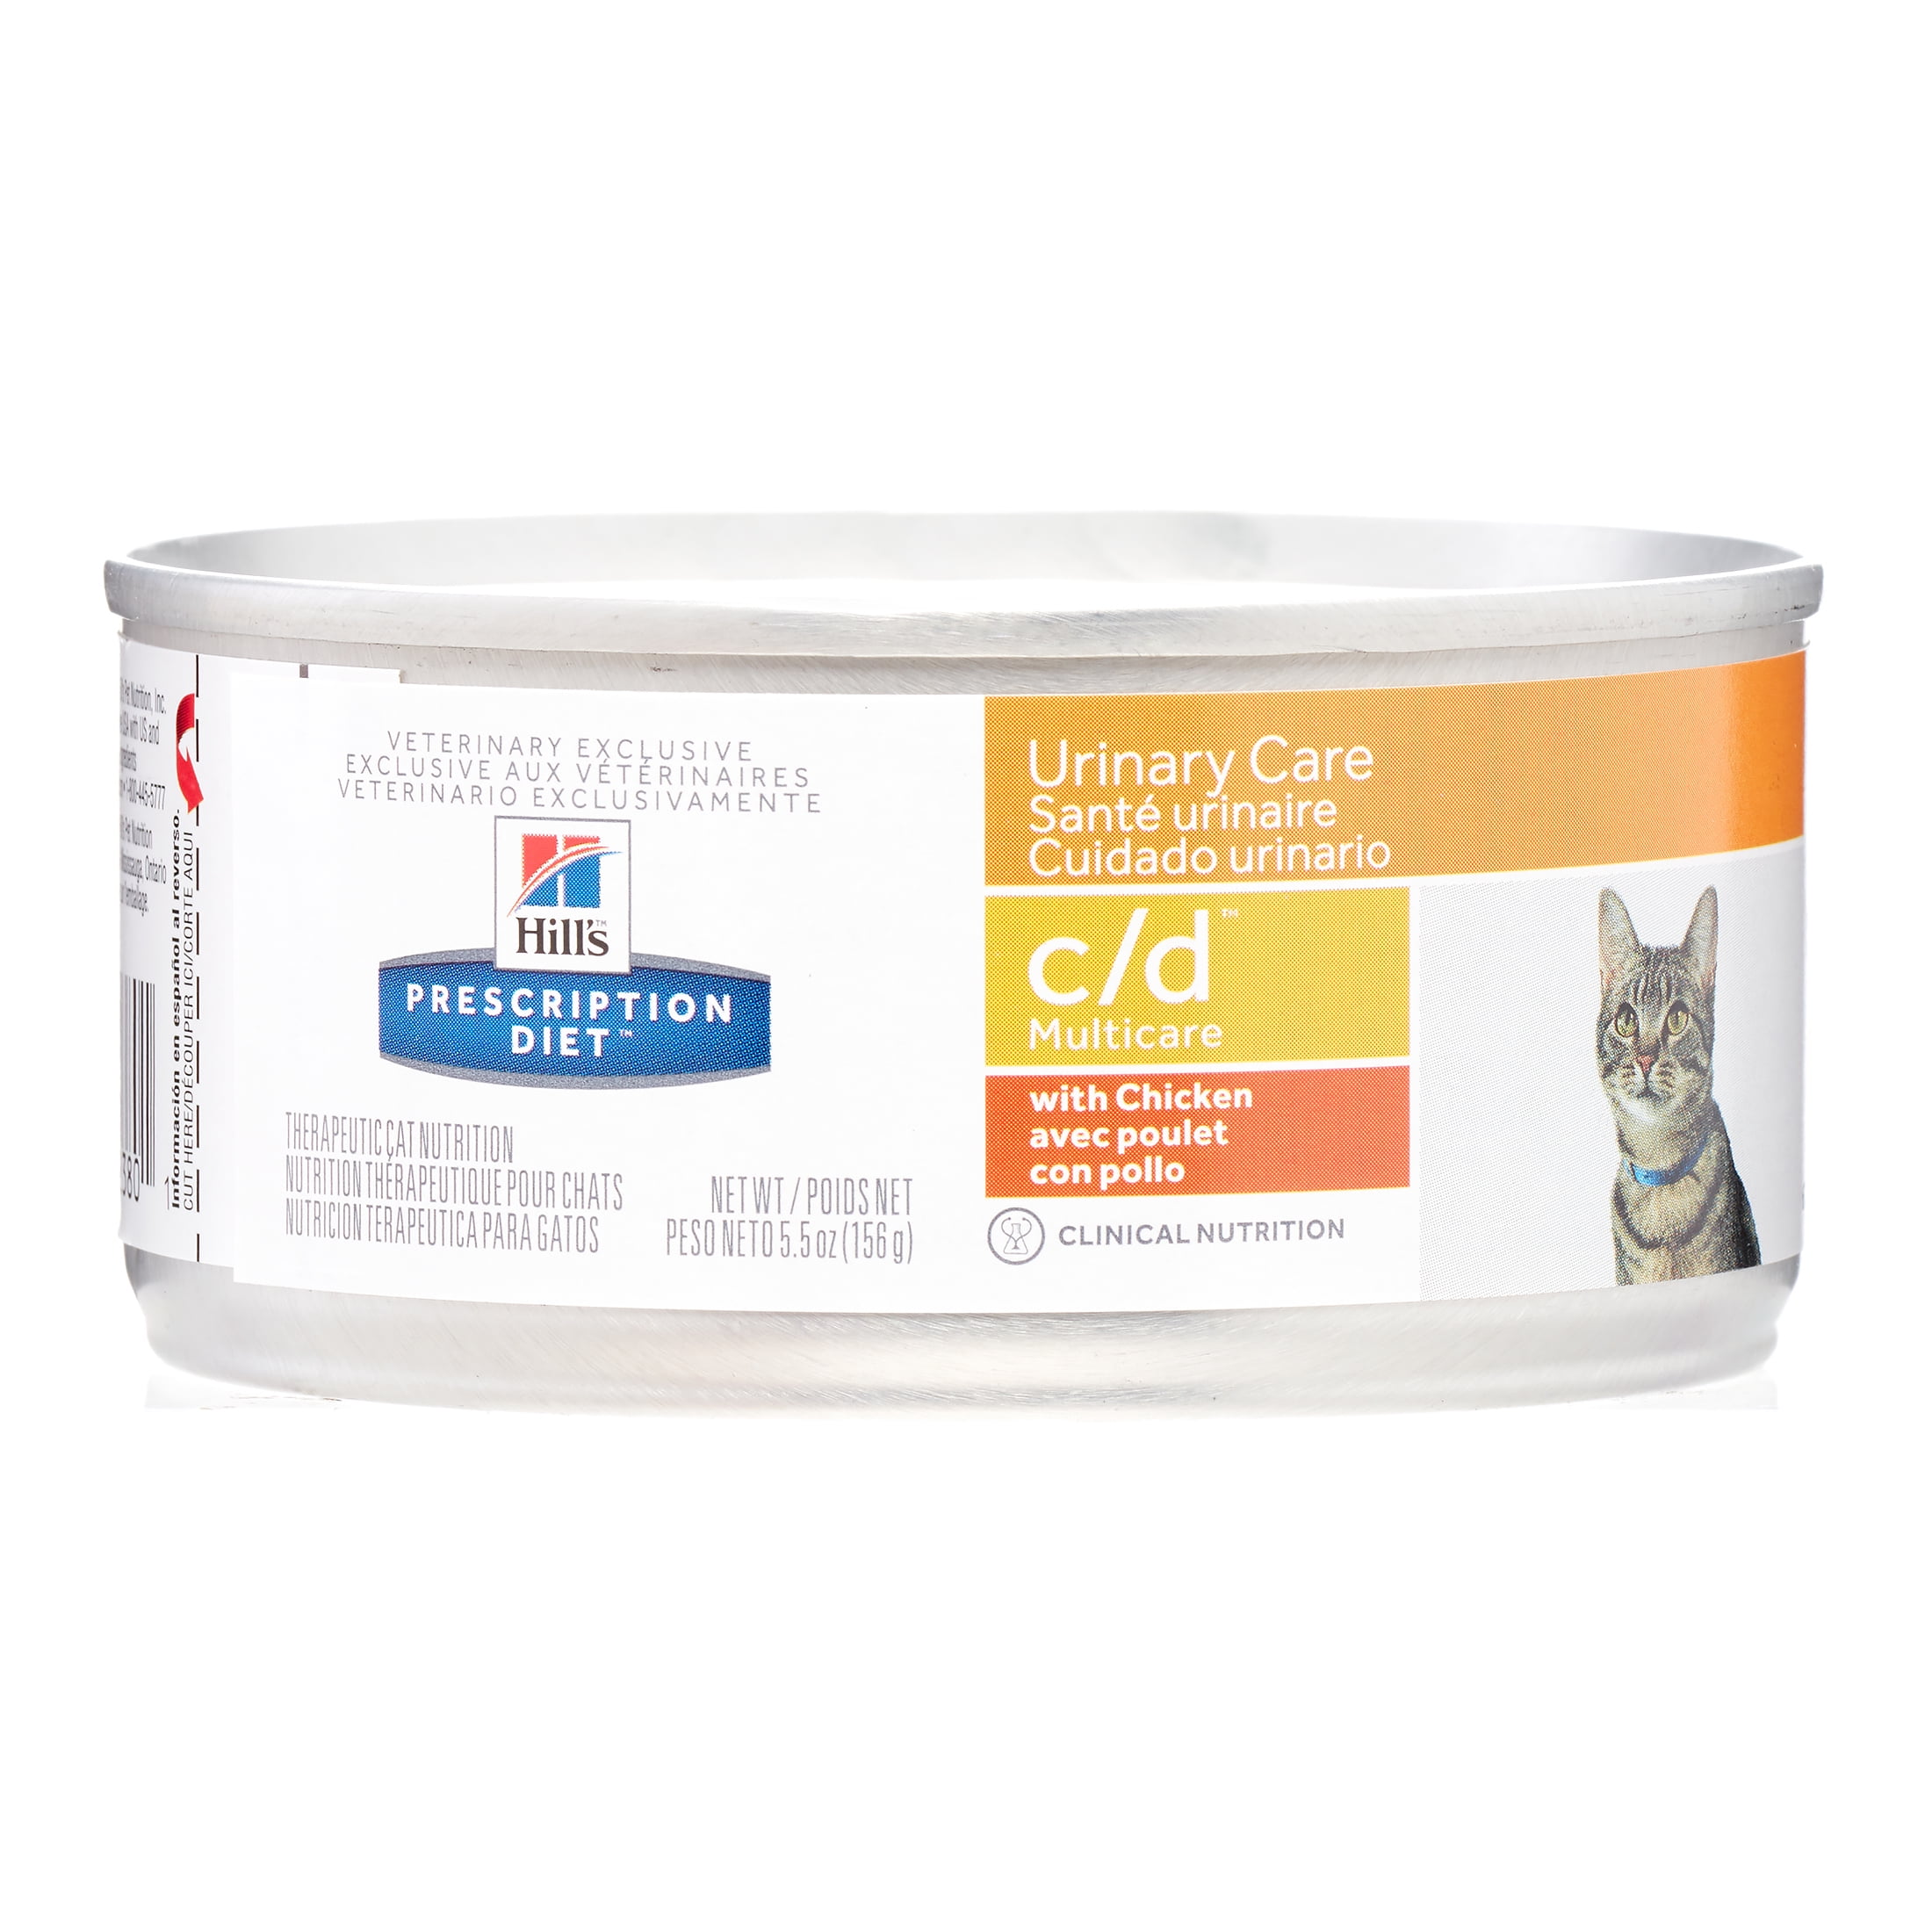 Hill's Prescription Diet Urinary Care c/d Chicken Cat Food (24 x 5.5 Cans) -